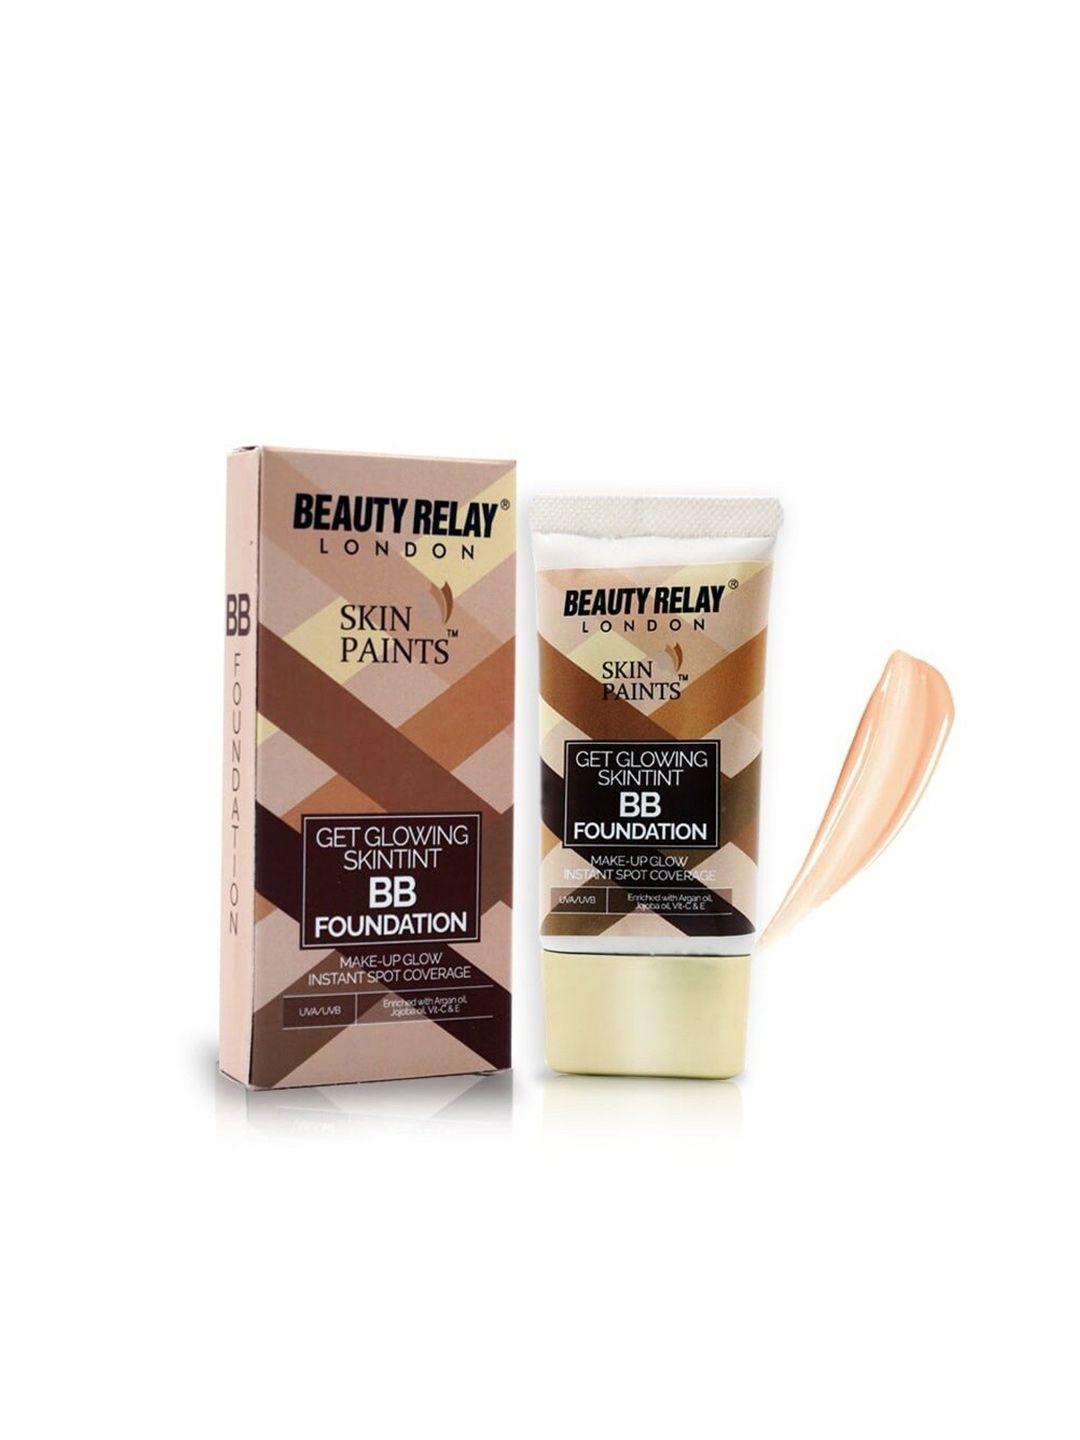 beautyrelay london skin paints get glowing skintint bb foundation 30g - classic ivory 120